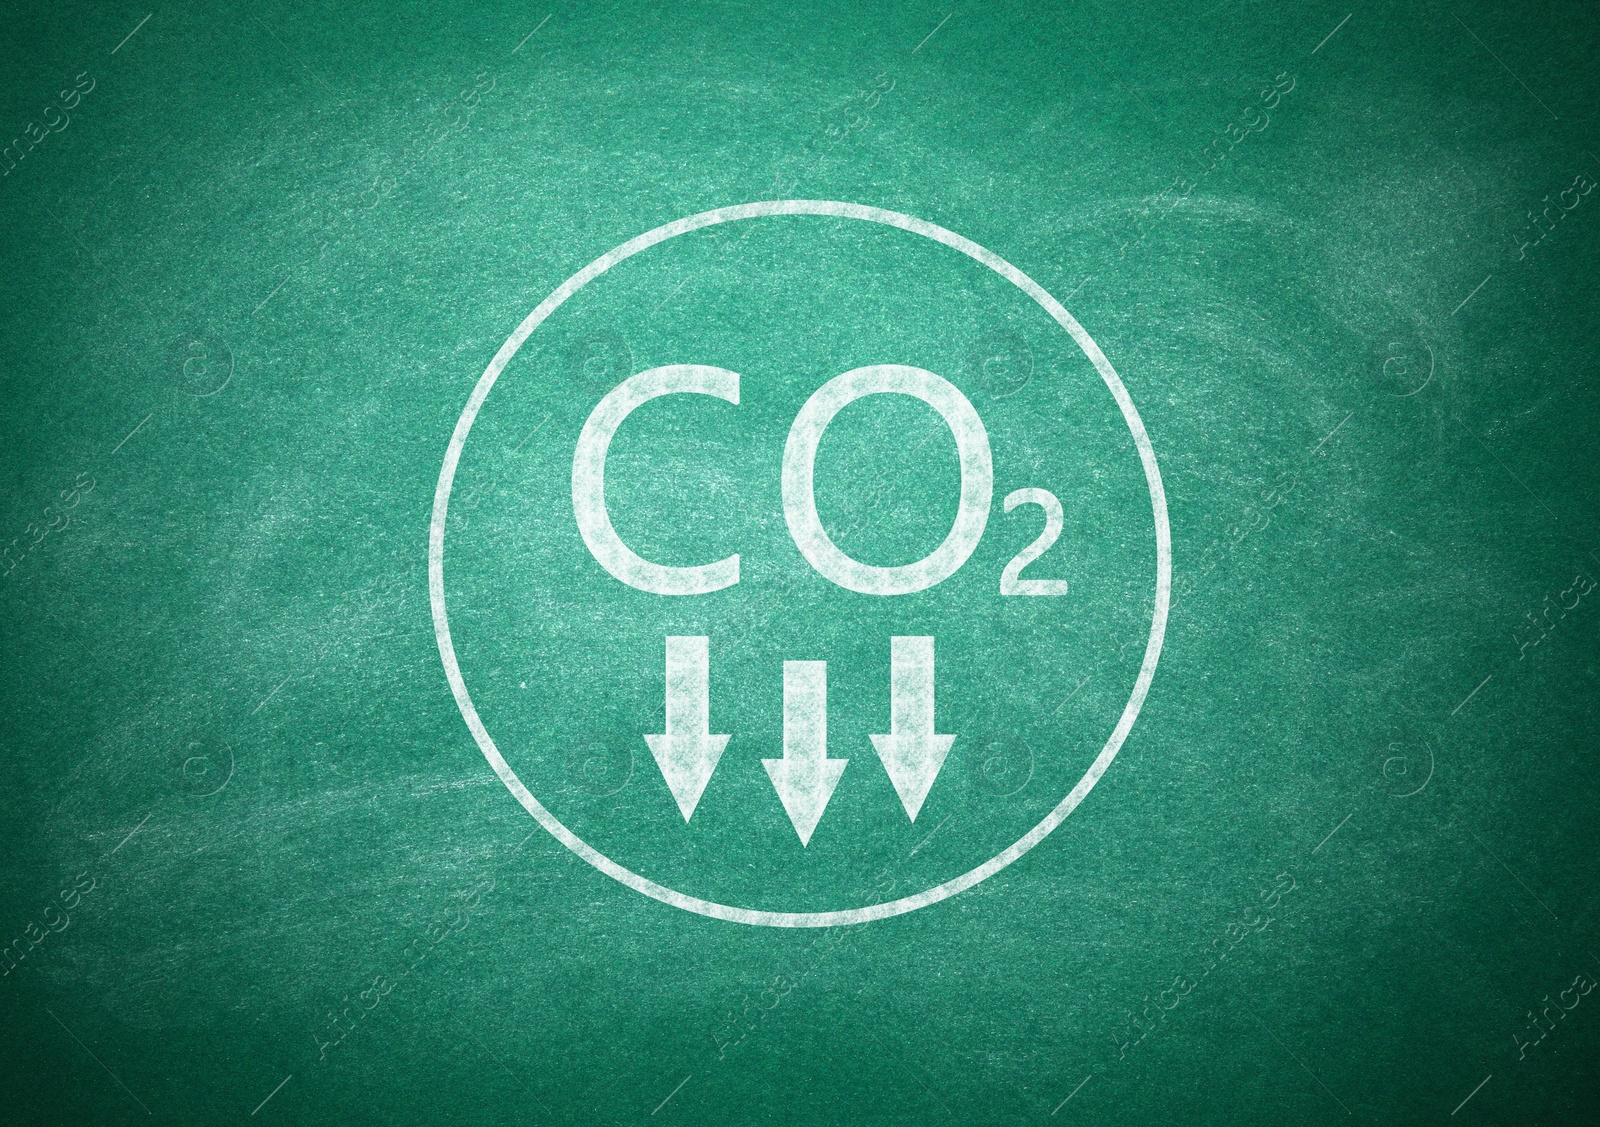 Image of Reduce carbon emissions. Chemical formula CO2 on green chalkboard